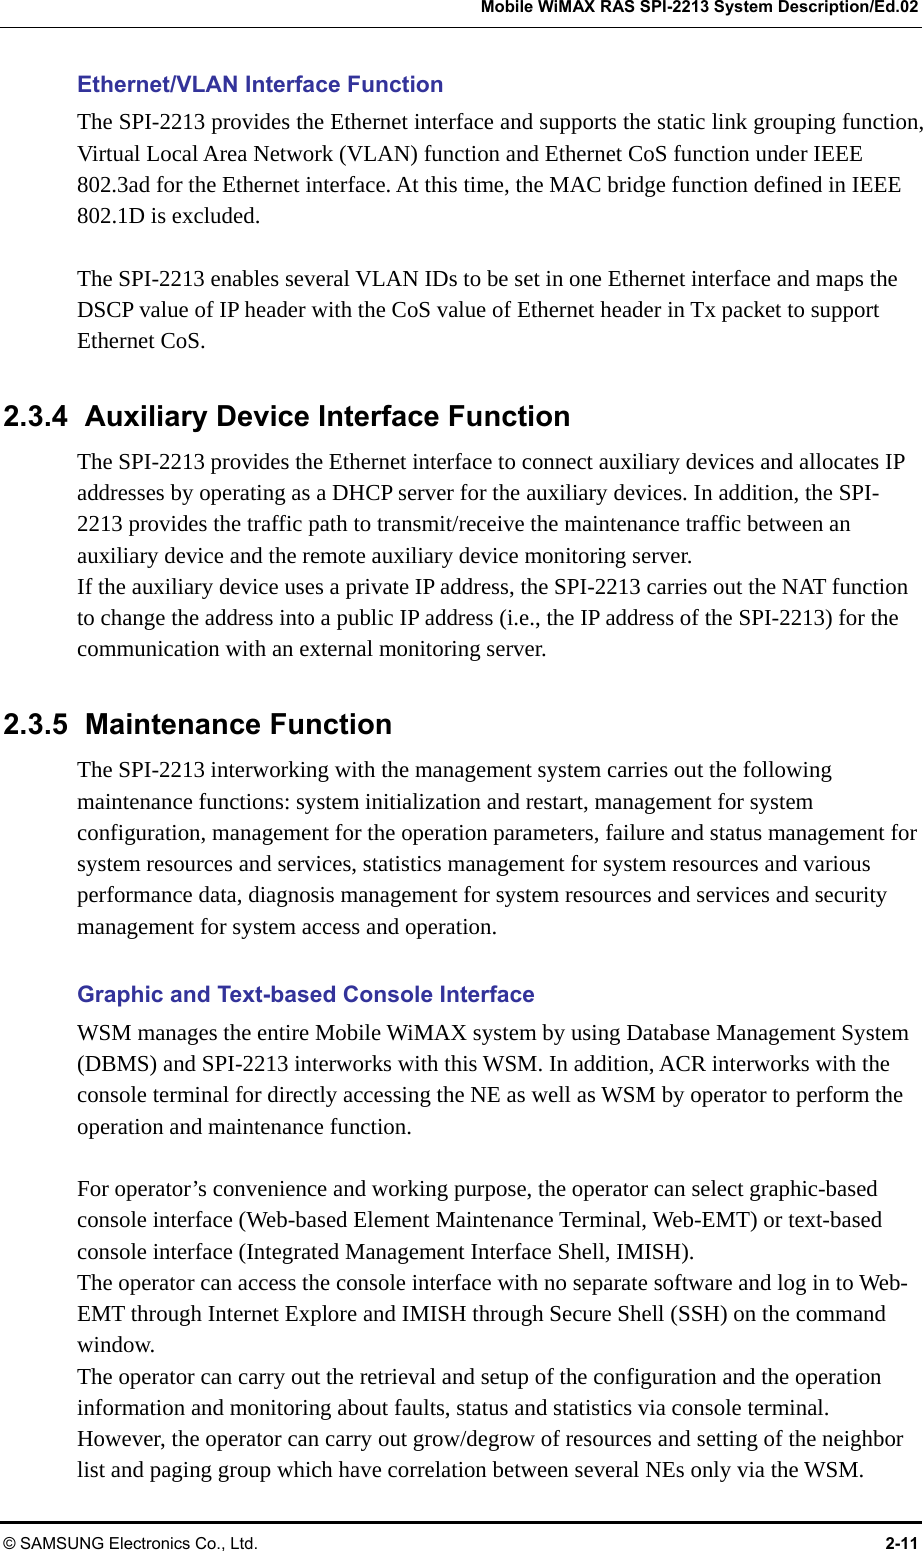   Mobile WiMAX RAS SPI-2213 System Description/Ed.02 © SAMSUNG Electronics Co., Ltd.  2-11 Ethernet/VLAN Interface Function The SPI-2213 provides the Ethernet interface and supports the static link grouping function, Virtual Local Area Network (VLAN) function and Ethernet CoS function under IEEE 802.3ad for the Ethernet interface. At this time, the MAC bridge function defined in IEEE 802.1D is excluded.  The SPI-2213 enables several VLAN IDs to be set in one Ethernet interface and maps the DSCP value of IP header with the CoS value of Ethernet header in Tx packet to support Ethernet CoS.  2.3.4  Auxiliary Device Interface Function The SPI-2213 provides the Ethernet interface to connect auxiliary devices and allocates IP addresses by operating as a DHCP server for the auxiliary devices. In addition, the SPI-2213 provides the traffic path to transmit/receive the maintenance traffic between an auxiliary device and the remote auxiliary device monitoring server. If the auxiliary device uses a private IP address, the SPI-2213 carries out the NAT function to change the address into a public IP address (i.e., the IP address of the SPI-2213) for the communication with an external monitoring server.  2.3.5 Maintenance Function The SPI-2213 interworking with the management system carries out the following maintenance functions: system initialization and restart, management for system configuration, management for the operation parameters, failure and status management for system resources and services, statistics management for system resources and various performance data, diagnosis management for system resources and services and security management for system access and operation.  Graphic and Text-based Console Interface WSM manages the entire Mobile WiMAX system by using Database Management System (DBMS) and SPI-2213 interworks with this WSM. In addition, ACR interworks with the console terminal for directly accessing the NE as well as WSM by operator to perform the operation and maintenance function.    For operator’s convenience and working purpose, the operator can select graphic-based console interface (Web-based Element Maintenance Terminal, Web-EMT) or text-based console interface (Integrated Management Interface Shell, IMISH). The operator can access the console interface with no separate software and log in to Web-EMT through Internet Explore and IMISH through Secure Shell (SSH) on the command window. The operator can carry out the retrieval and setup of the configuration and the operation information and monitoring about faults, status and statistics via console terminal. However, the operator can carry out grow/degrow of resources and setting of the neighbor list and paging group which have correlation between several NEs only via the WSM. 